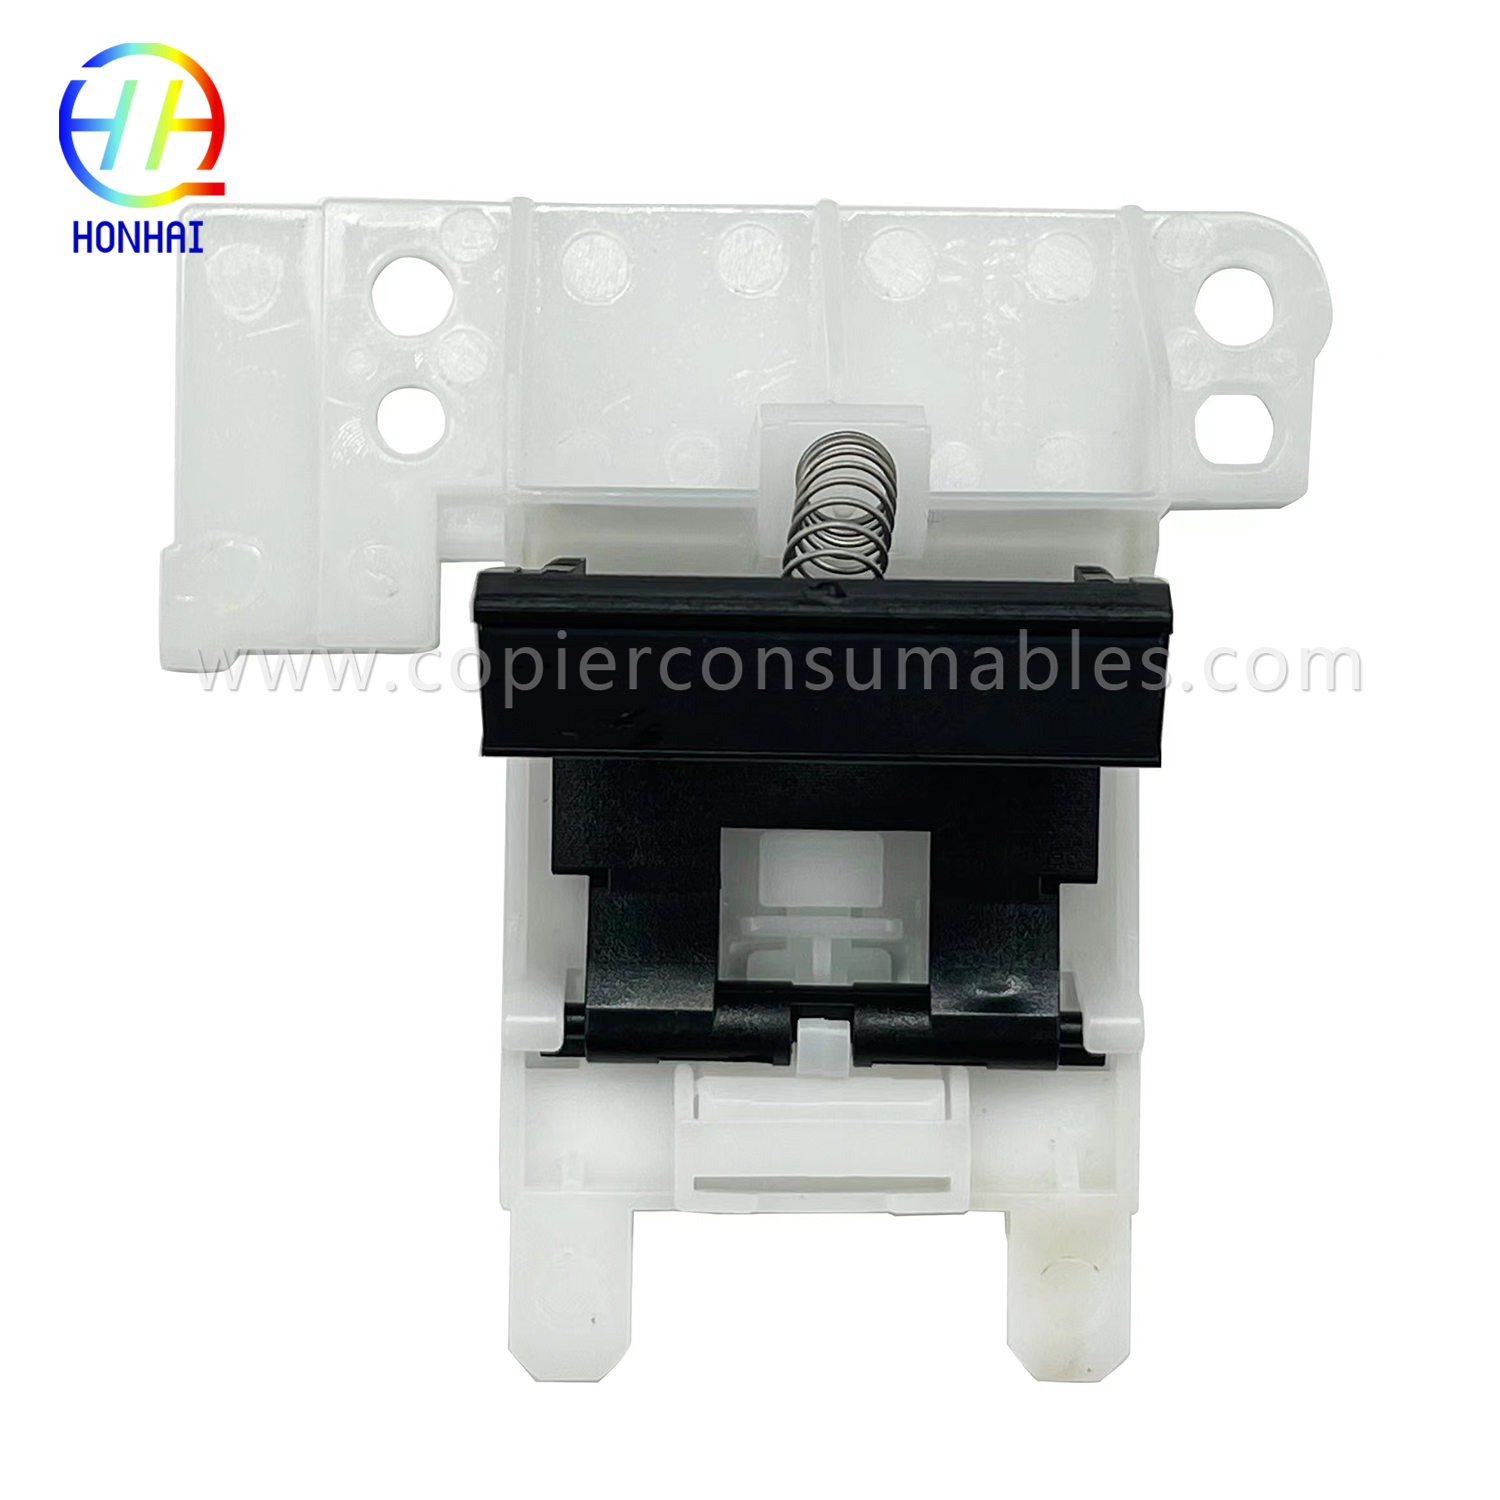 Separation Pad for HP M203